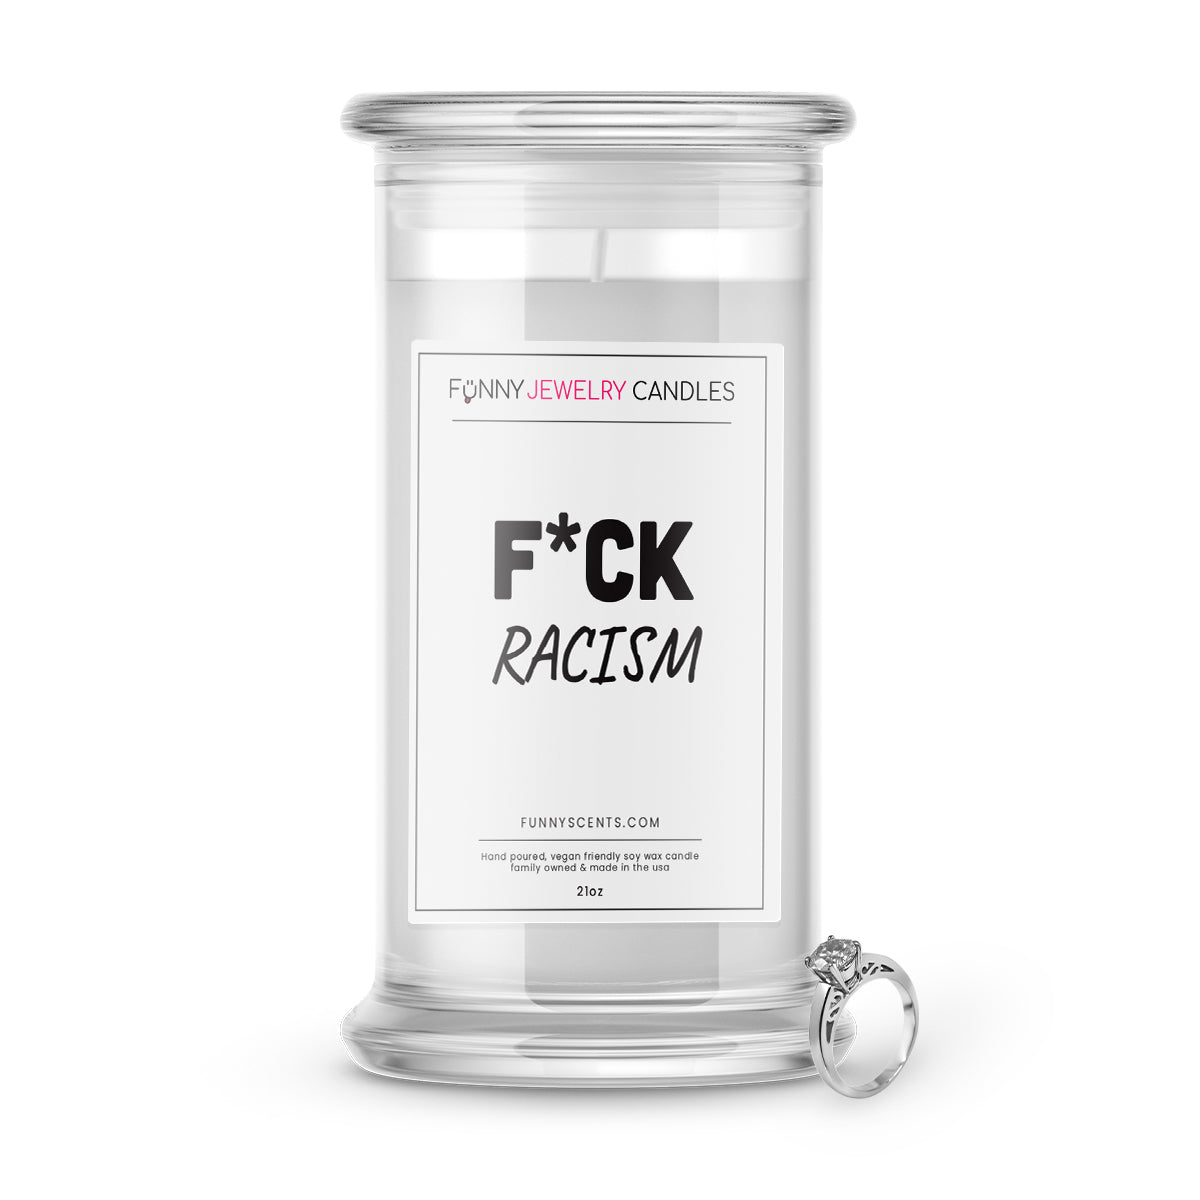 F*ck Racism Jewelry Funny Candles